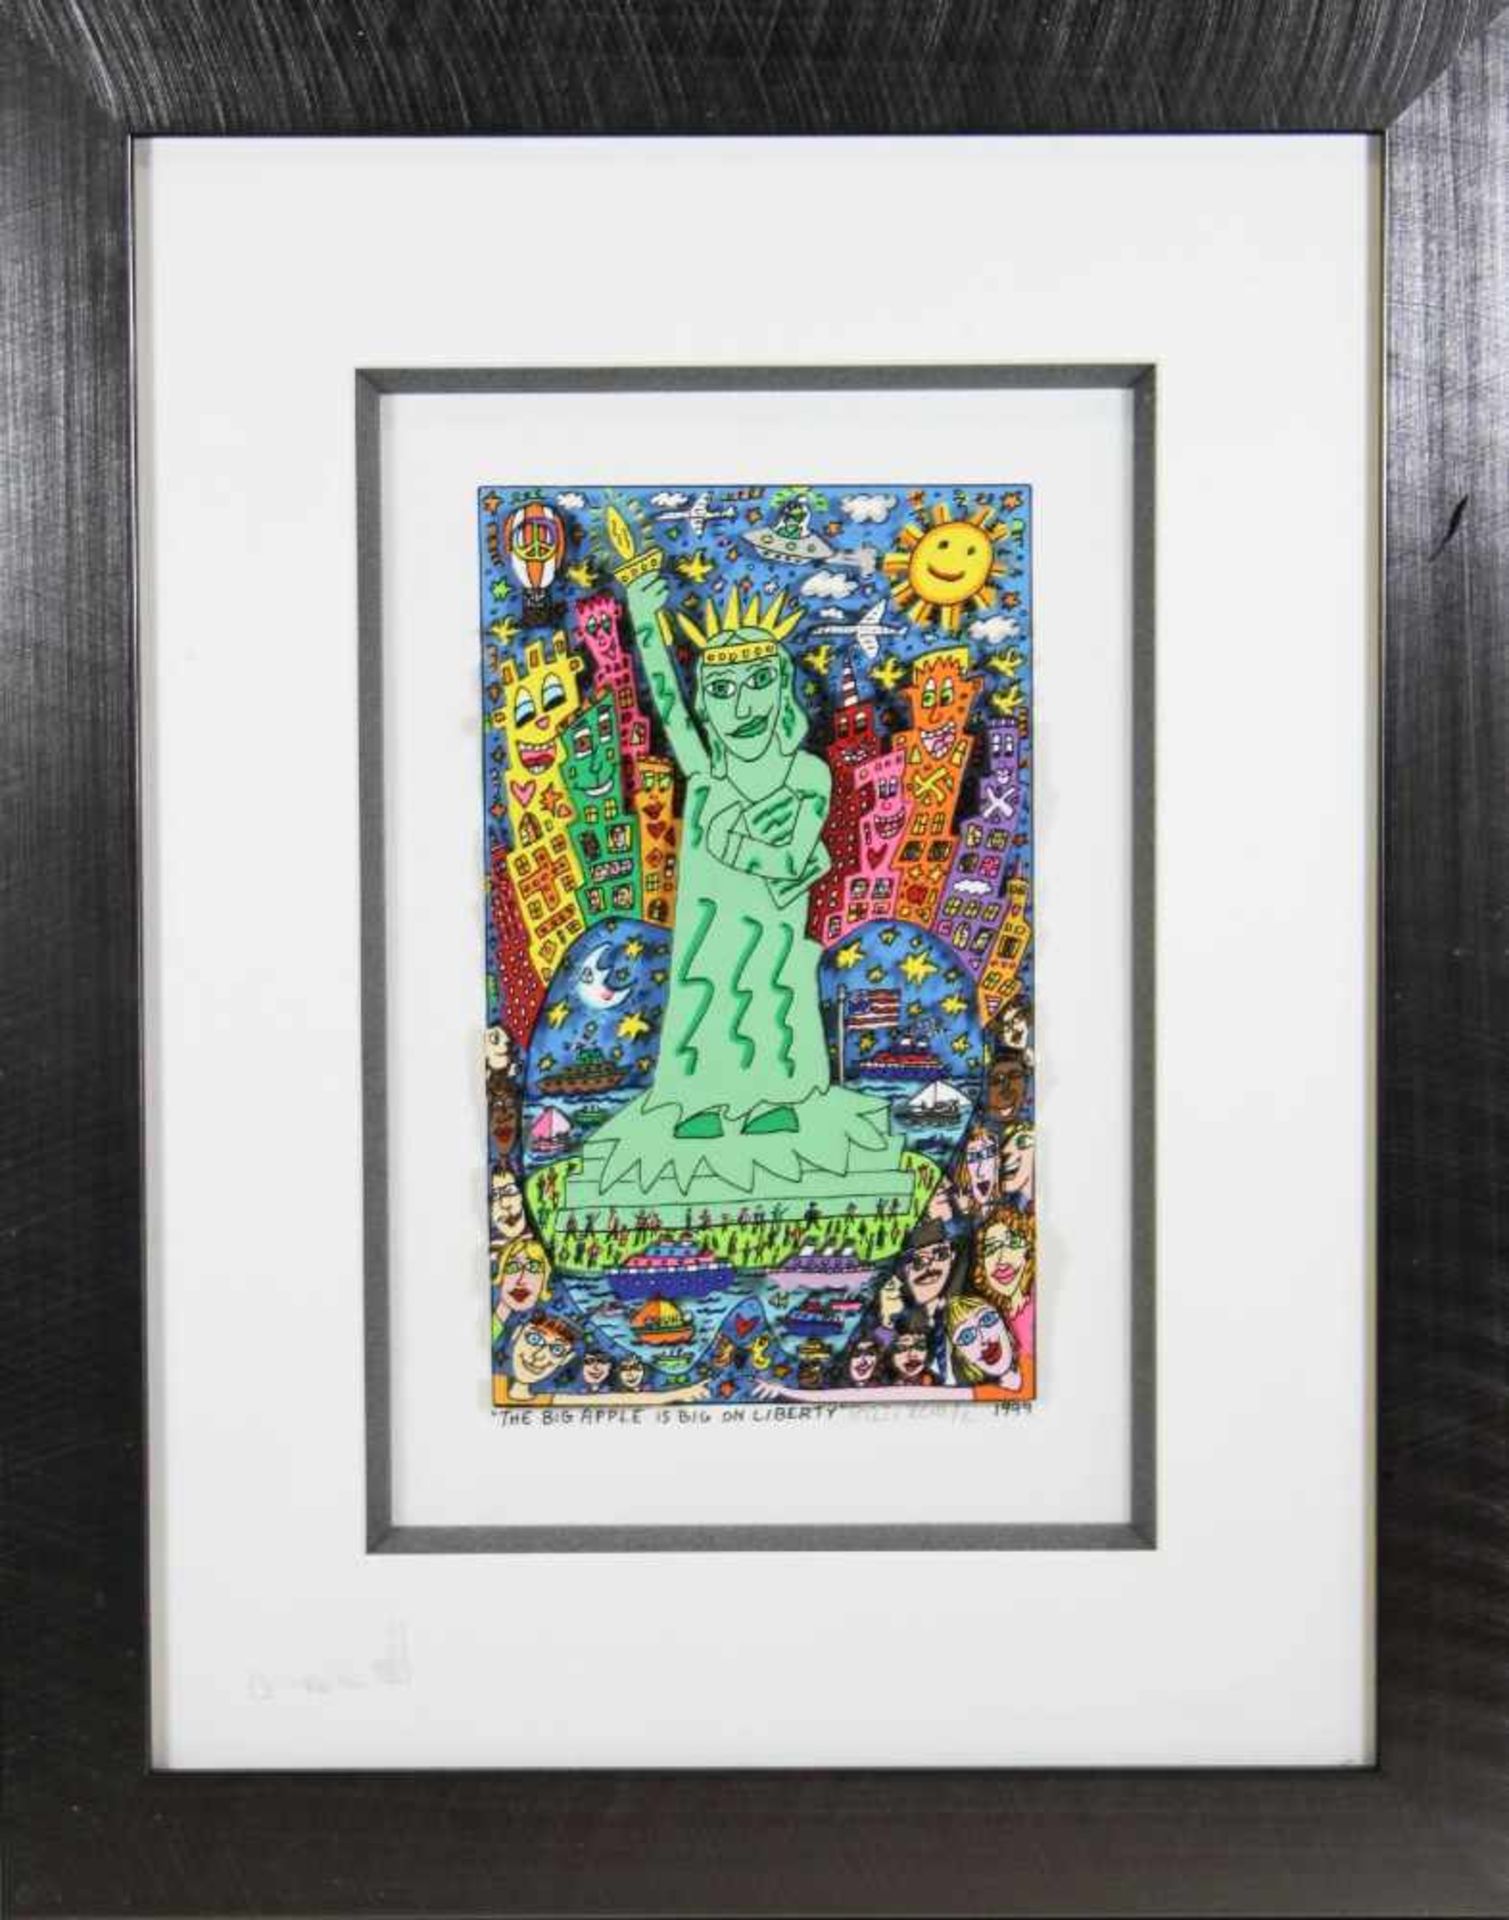 James Rizzi (1950 - 2011), The big apple is big on Liberty, 1999, 3-D Lithografie in Farbe, im Stein - Image 2 of 3